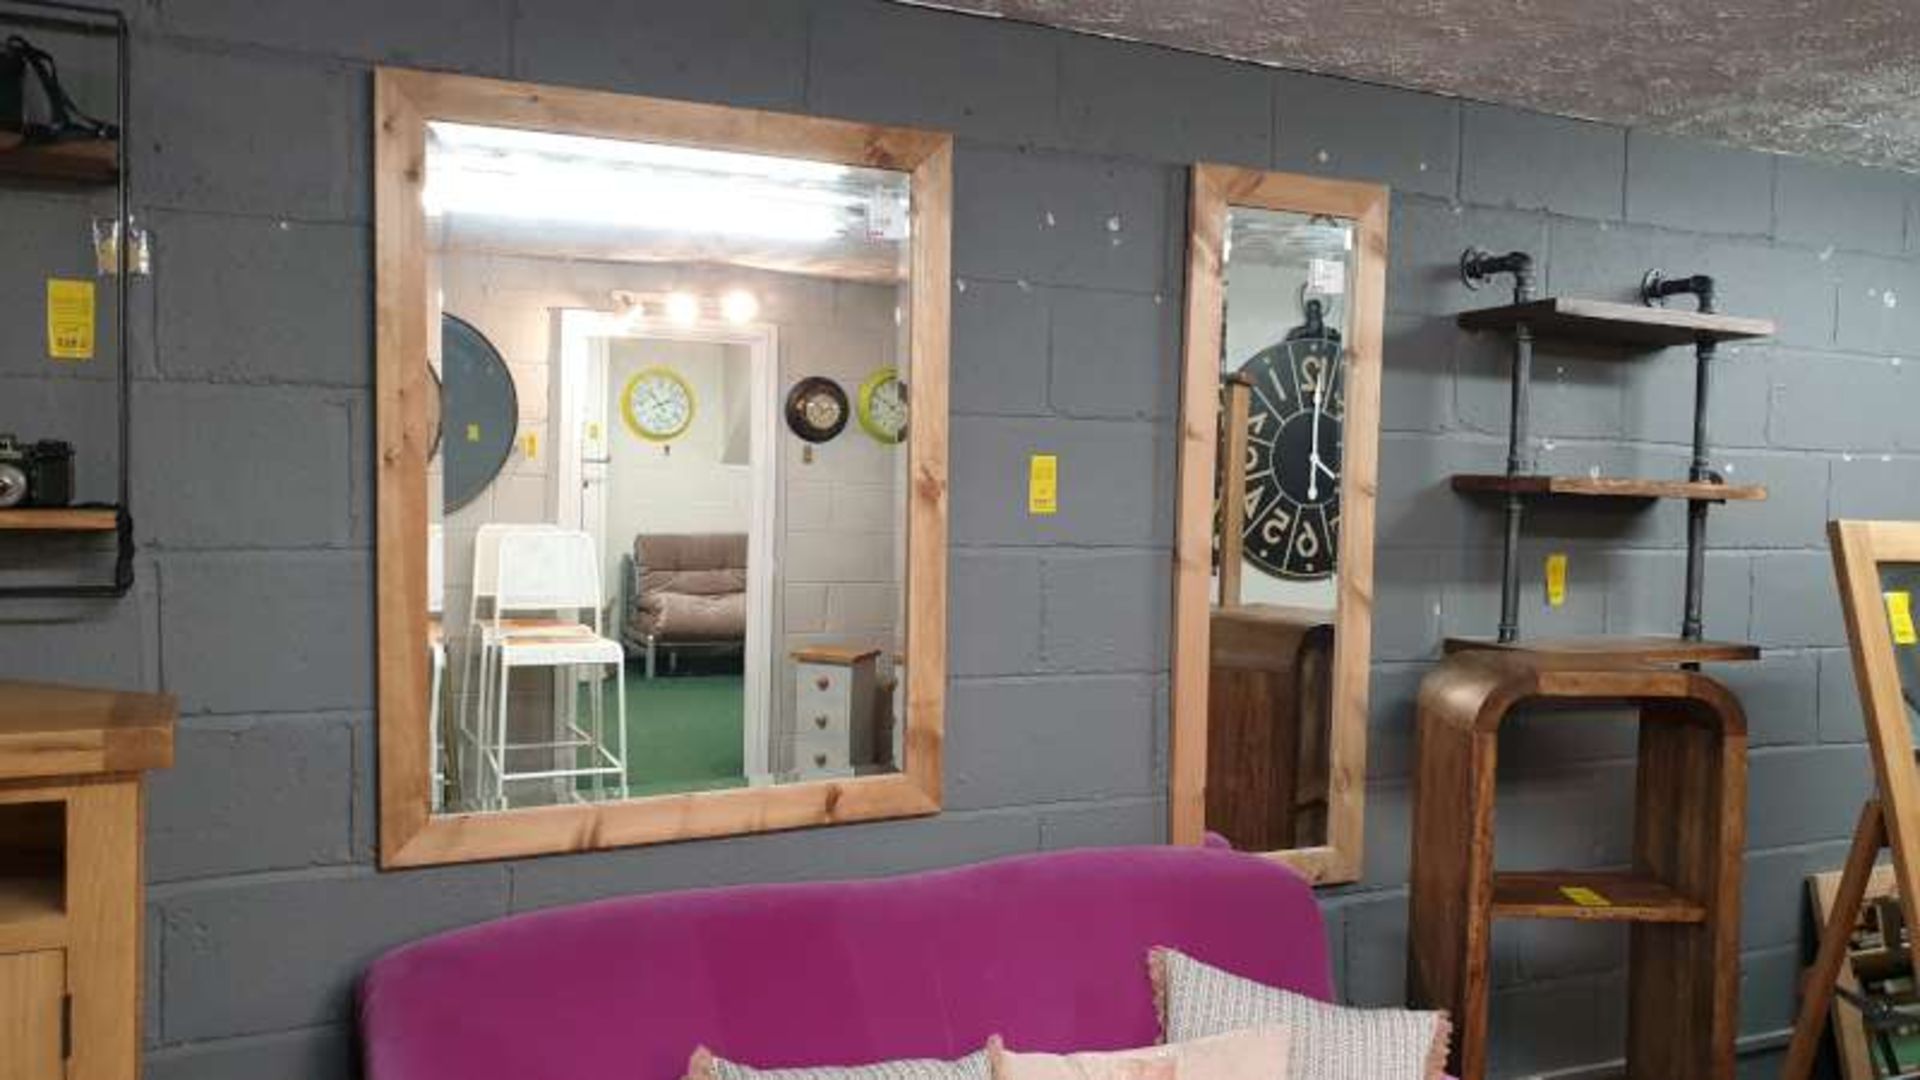 2 X WOODEN MIRRORS WITH BEVELLED GLASS 115 X 90CM AND 135 X 43CM TOTAL RRP £118